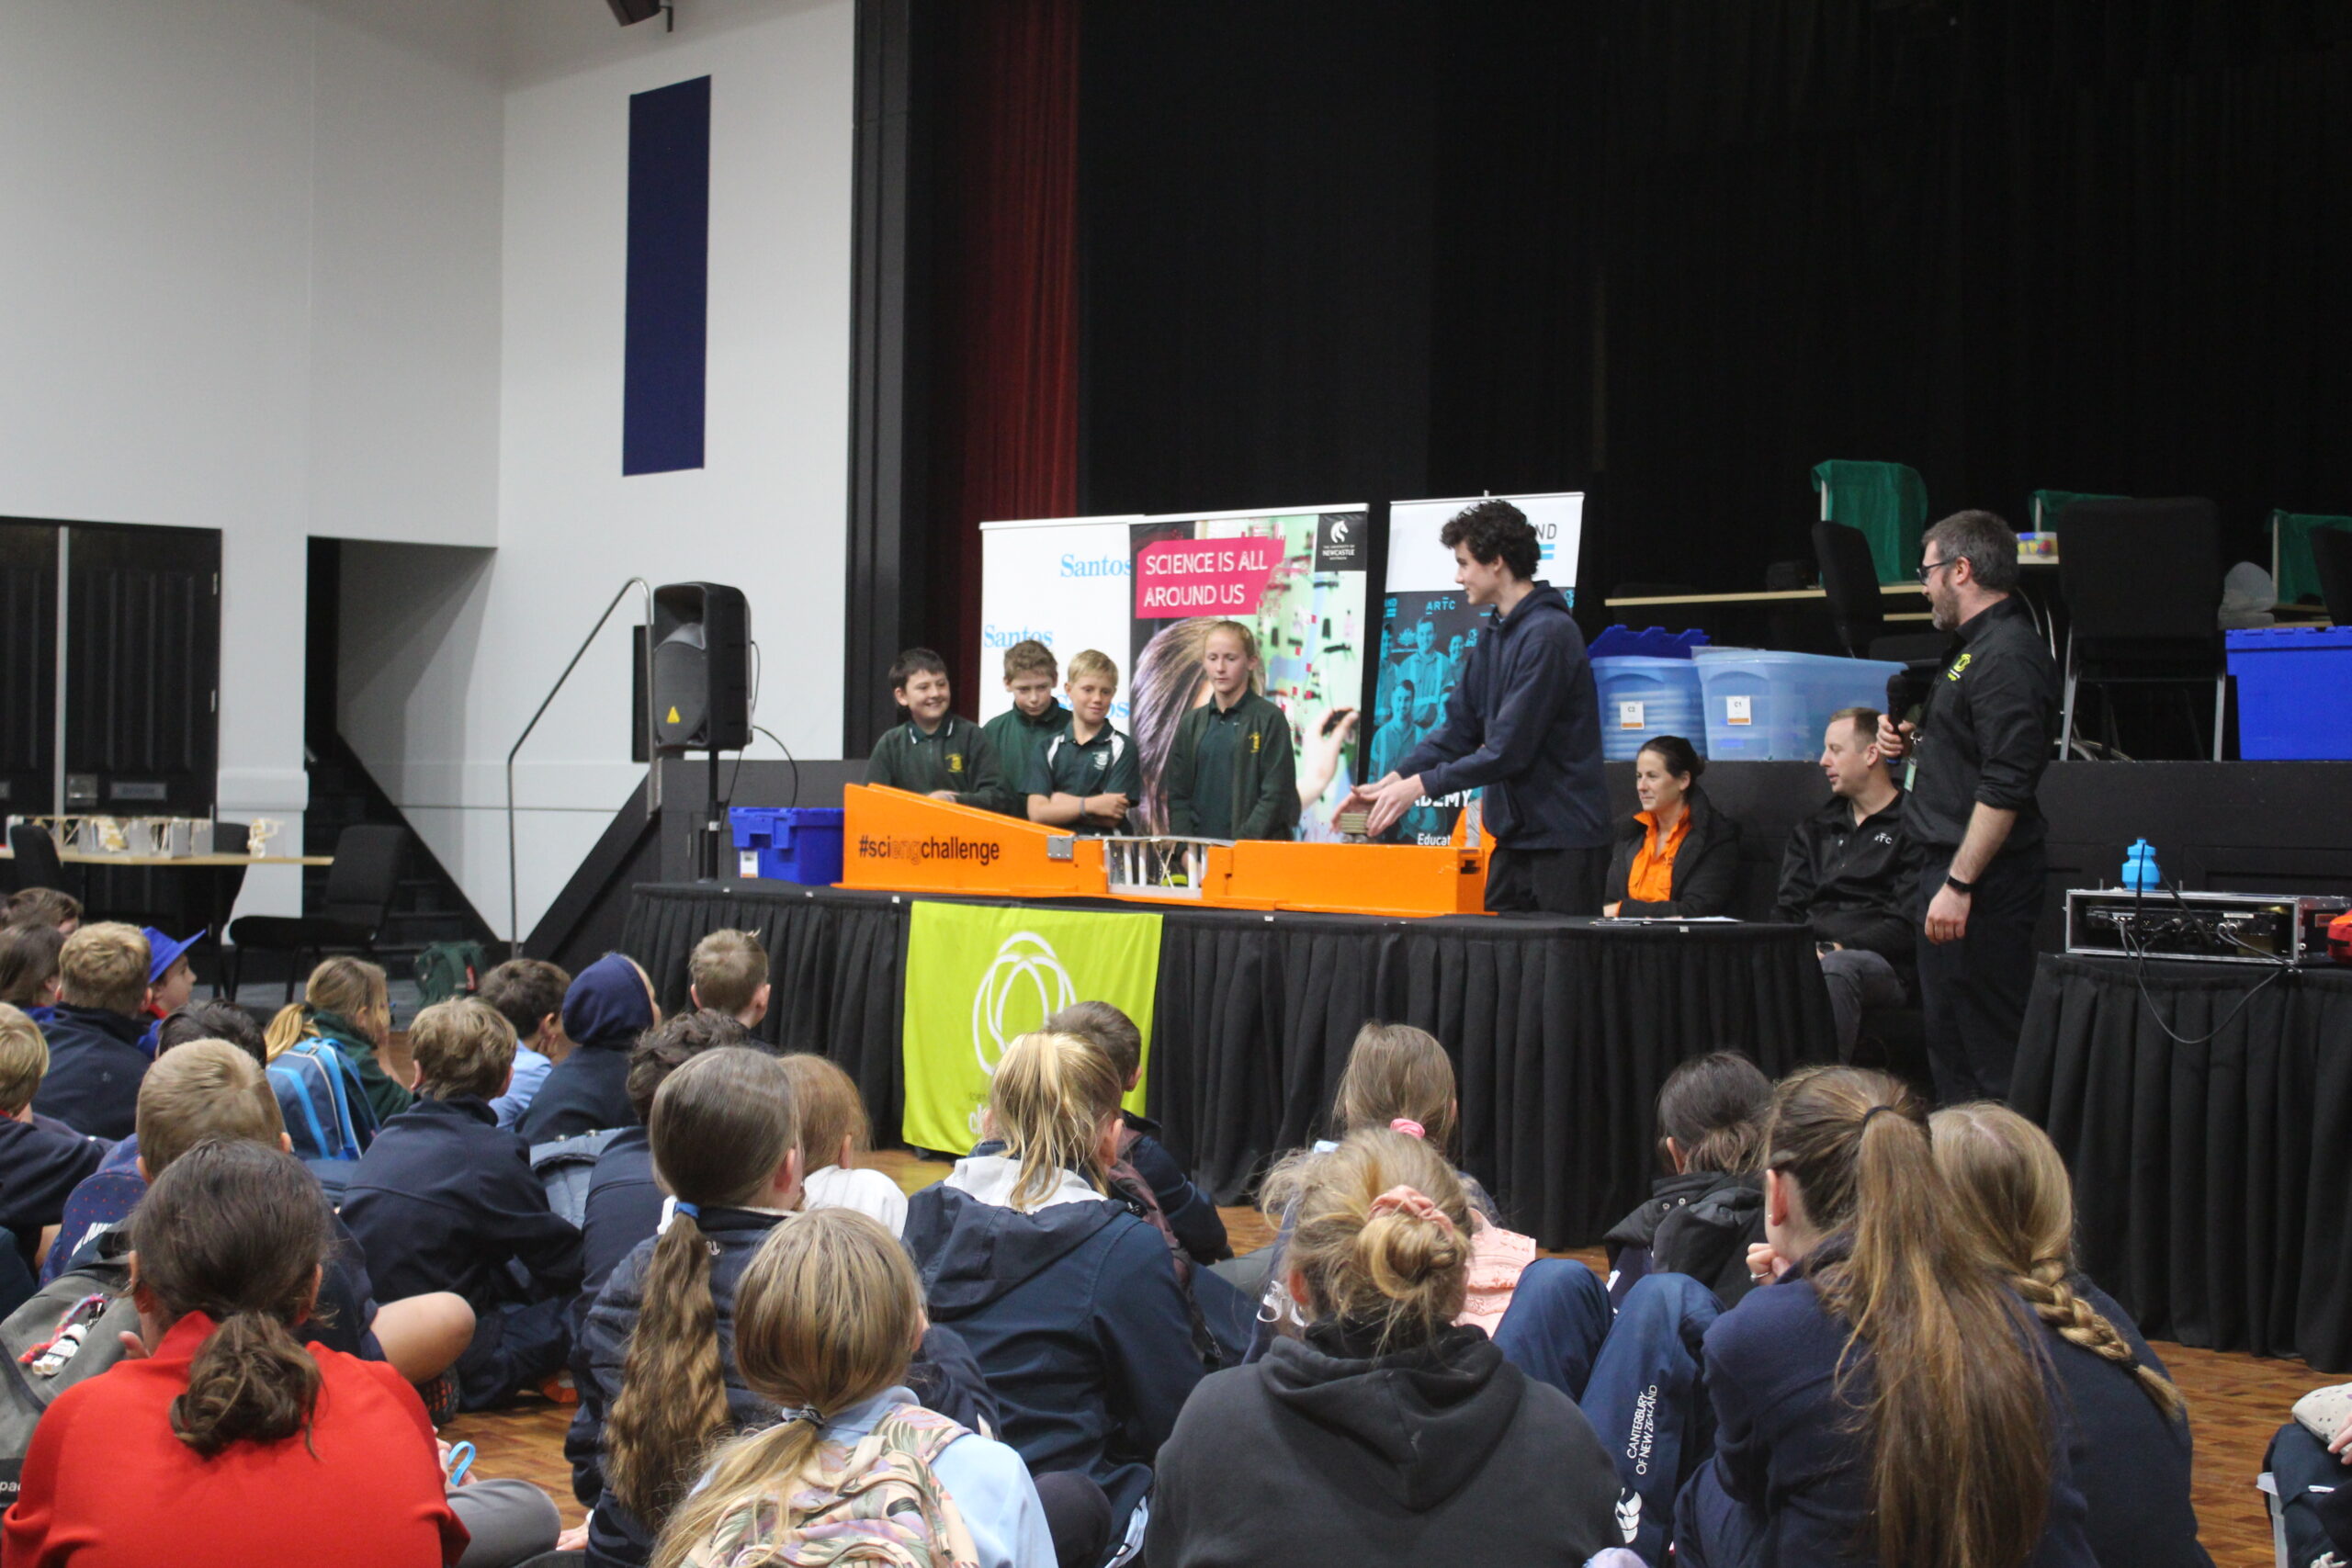 St Francis Xavier’s Narrabri students Liam Vitnell, Bradley Johnson, Leo Roth and Aleira Sunderland taking on the bridge challenge in front of the crowd.